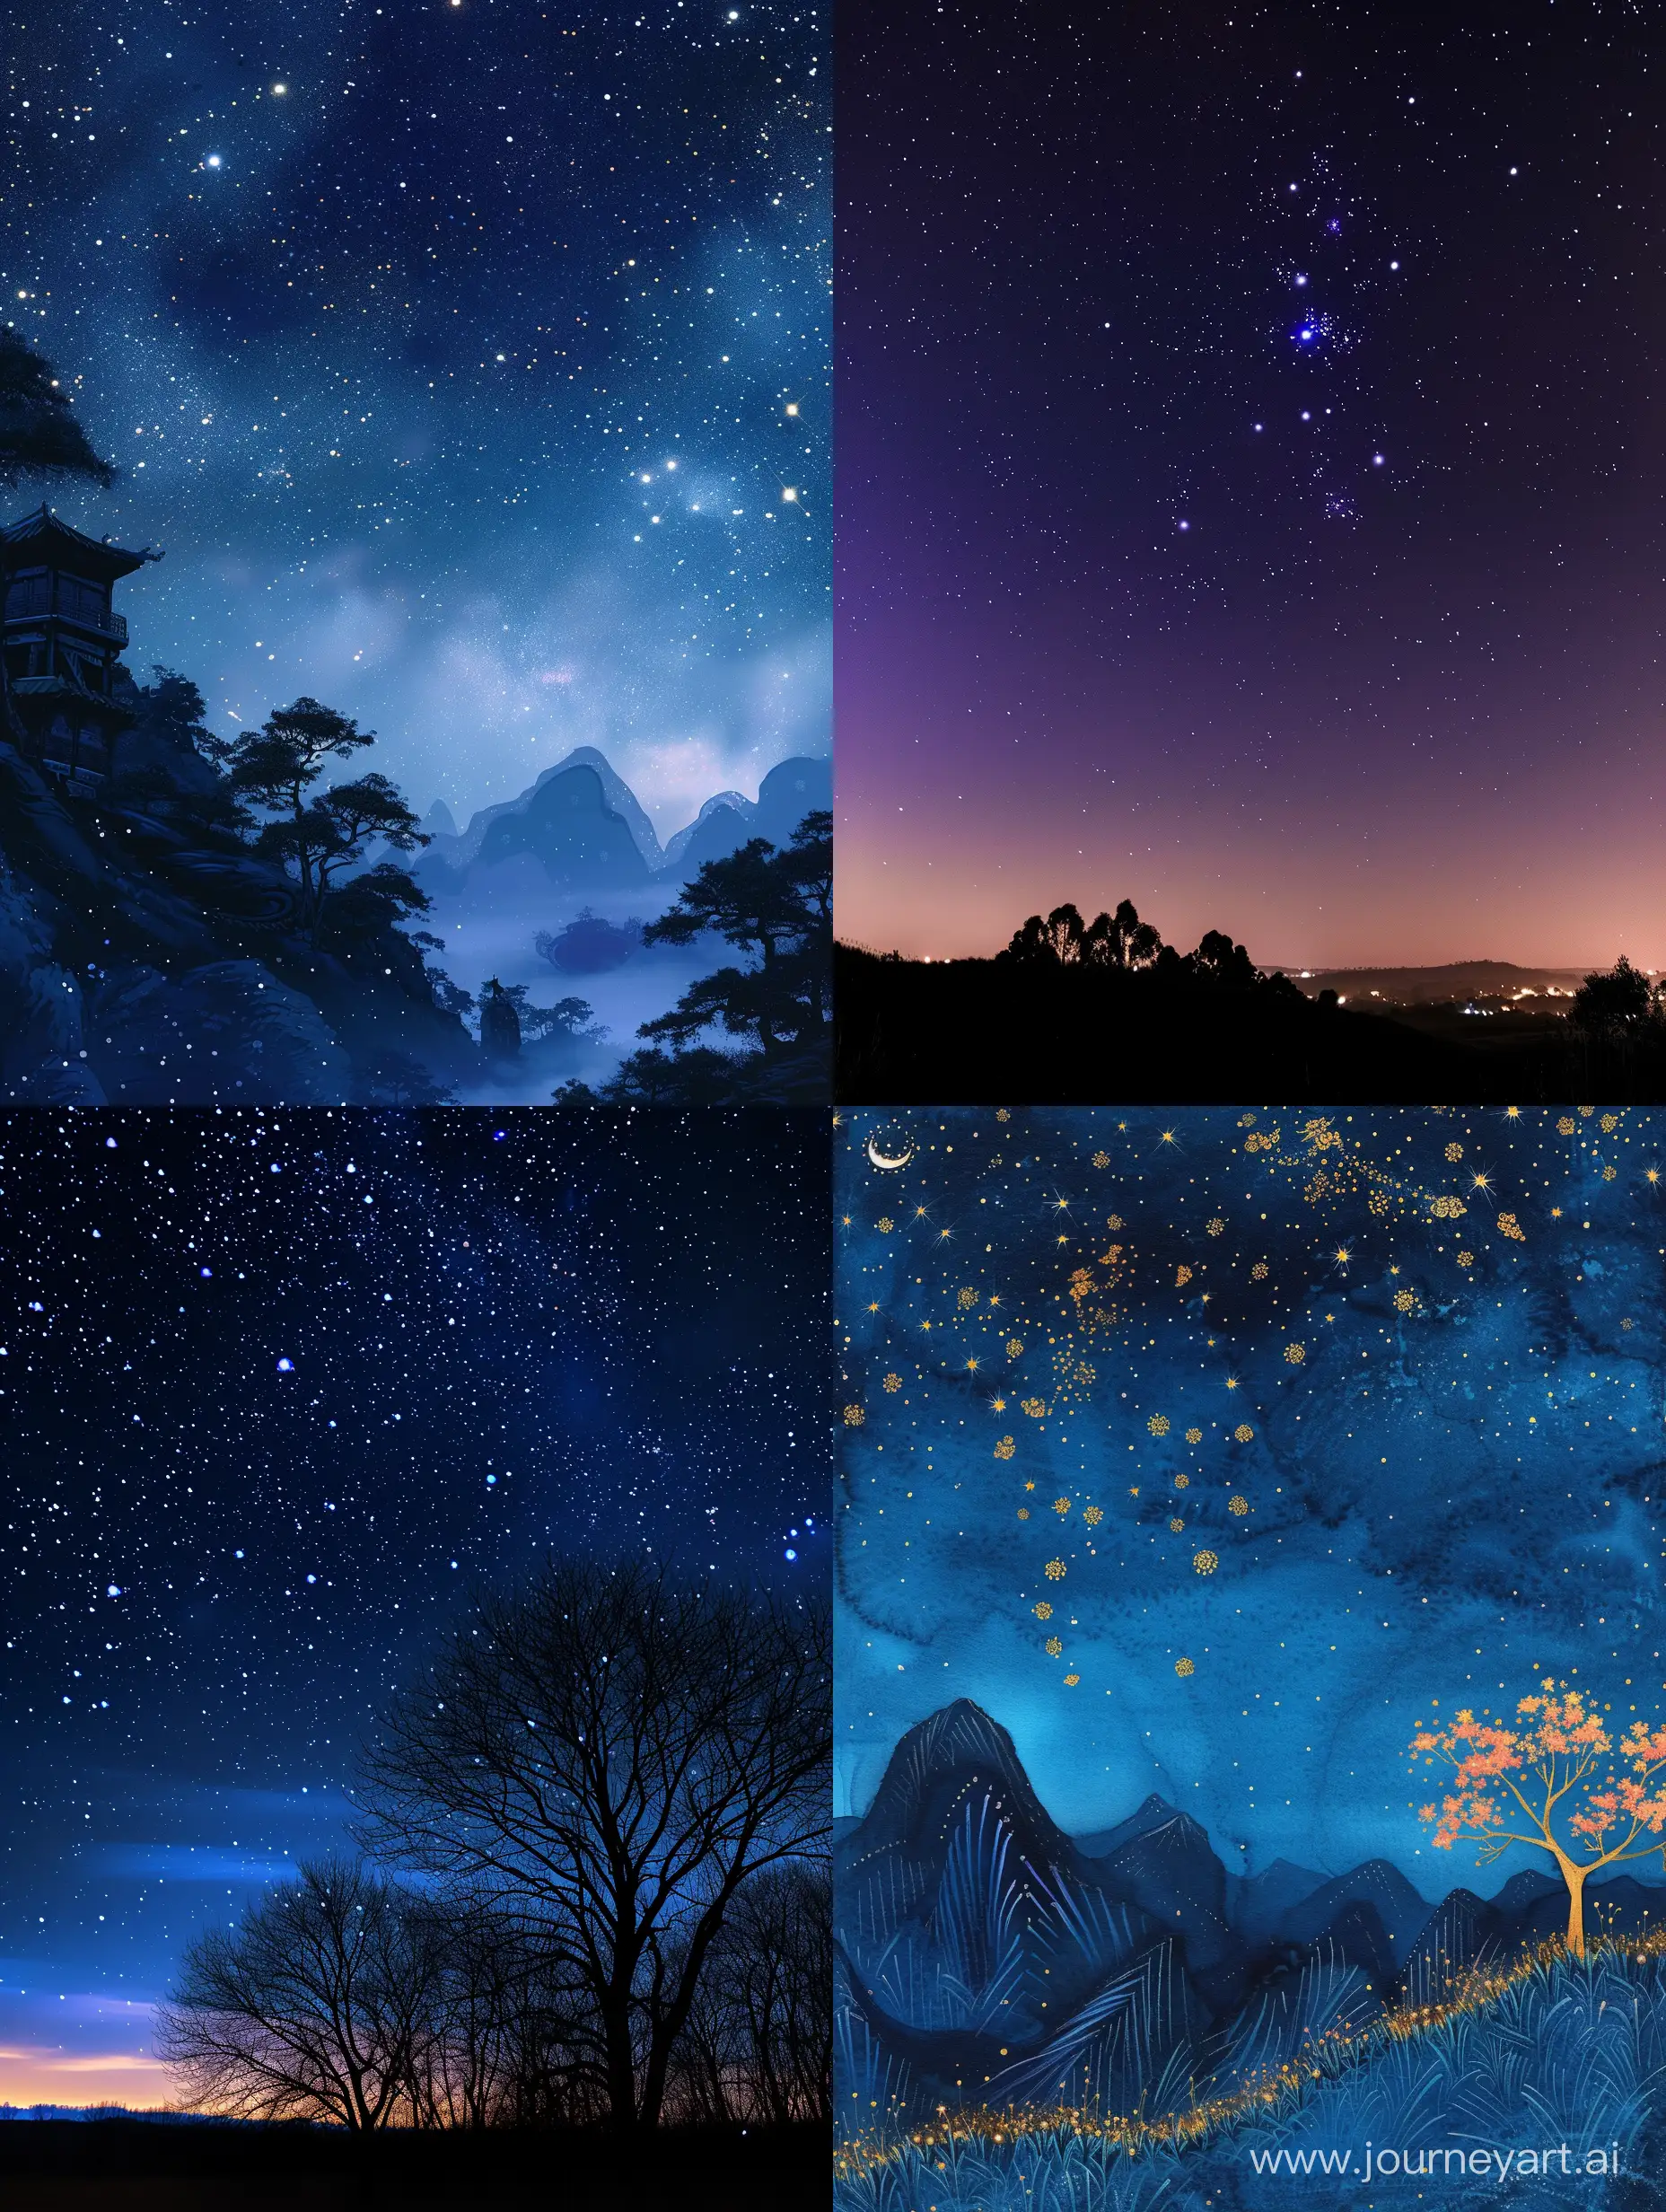 Year-of-the-Dragon-Celebration-under-the-Starry-Sky